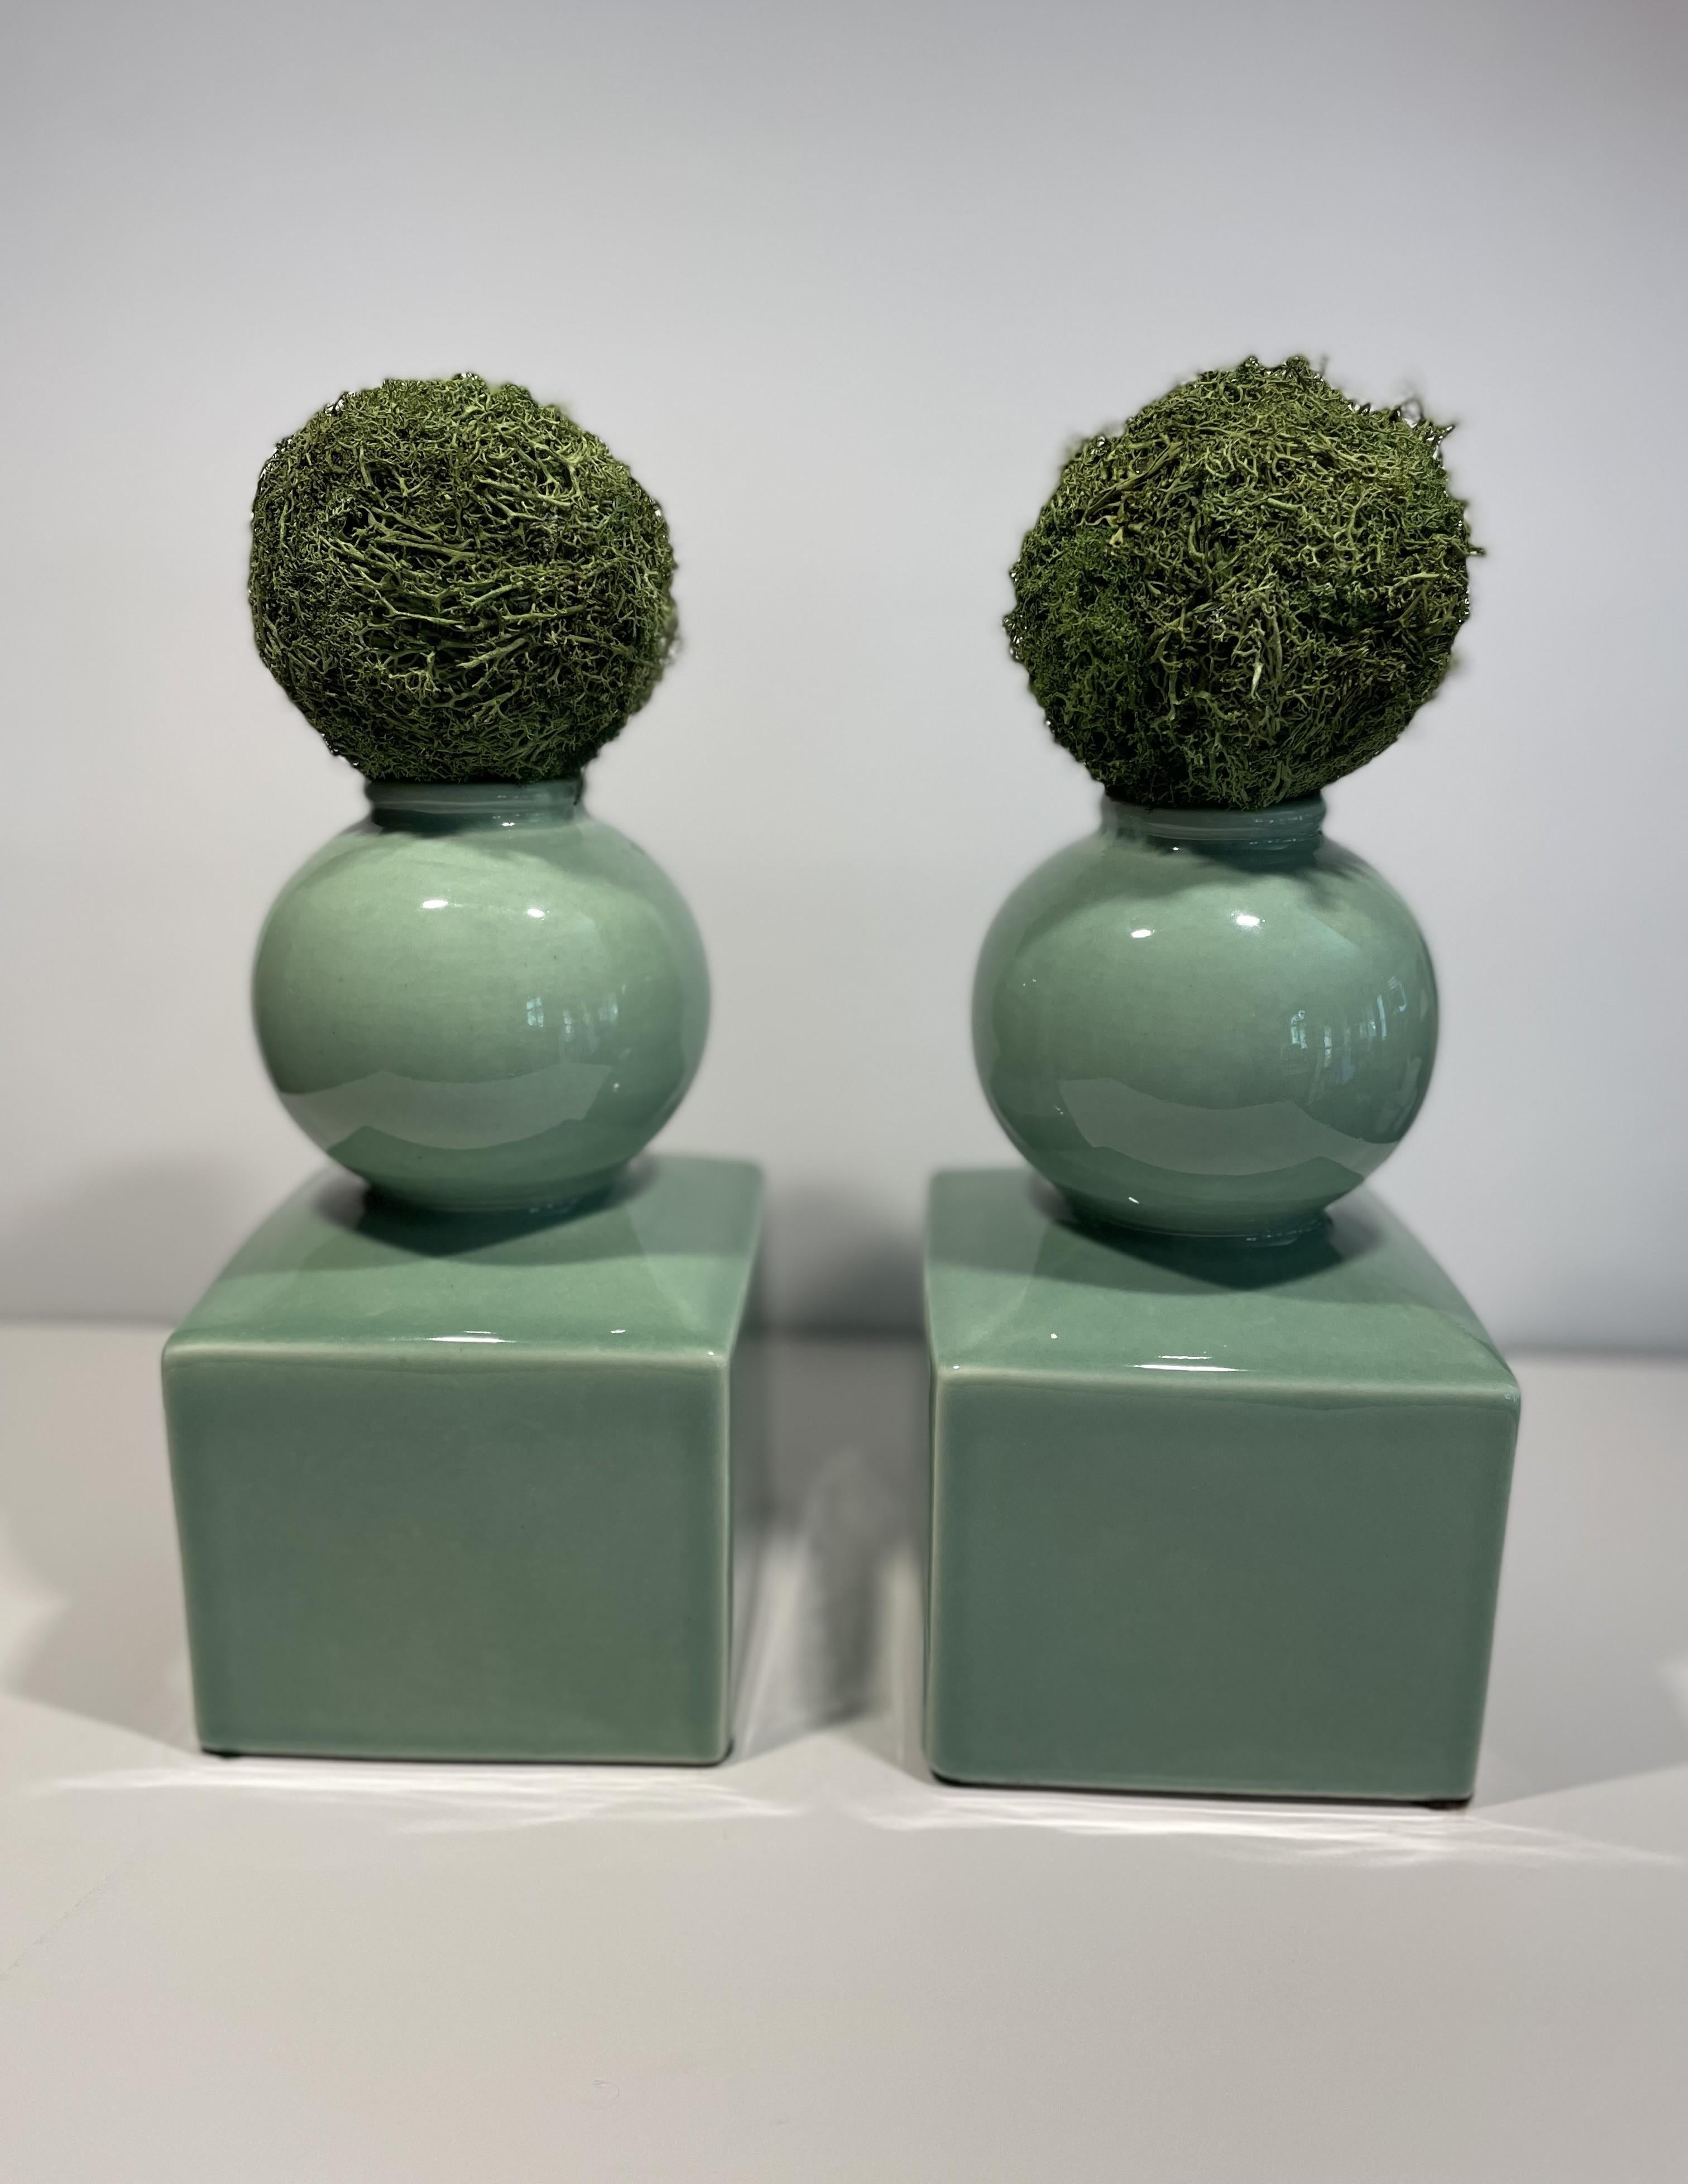 Love this pair of vases or bookends, attributed to Serena & Lily. They are beautifully proportioned and well-weighted. The glazed ceramic has a bit more hint of blue in the color, than these photos seem to show. There is something very pleasing in a